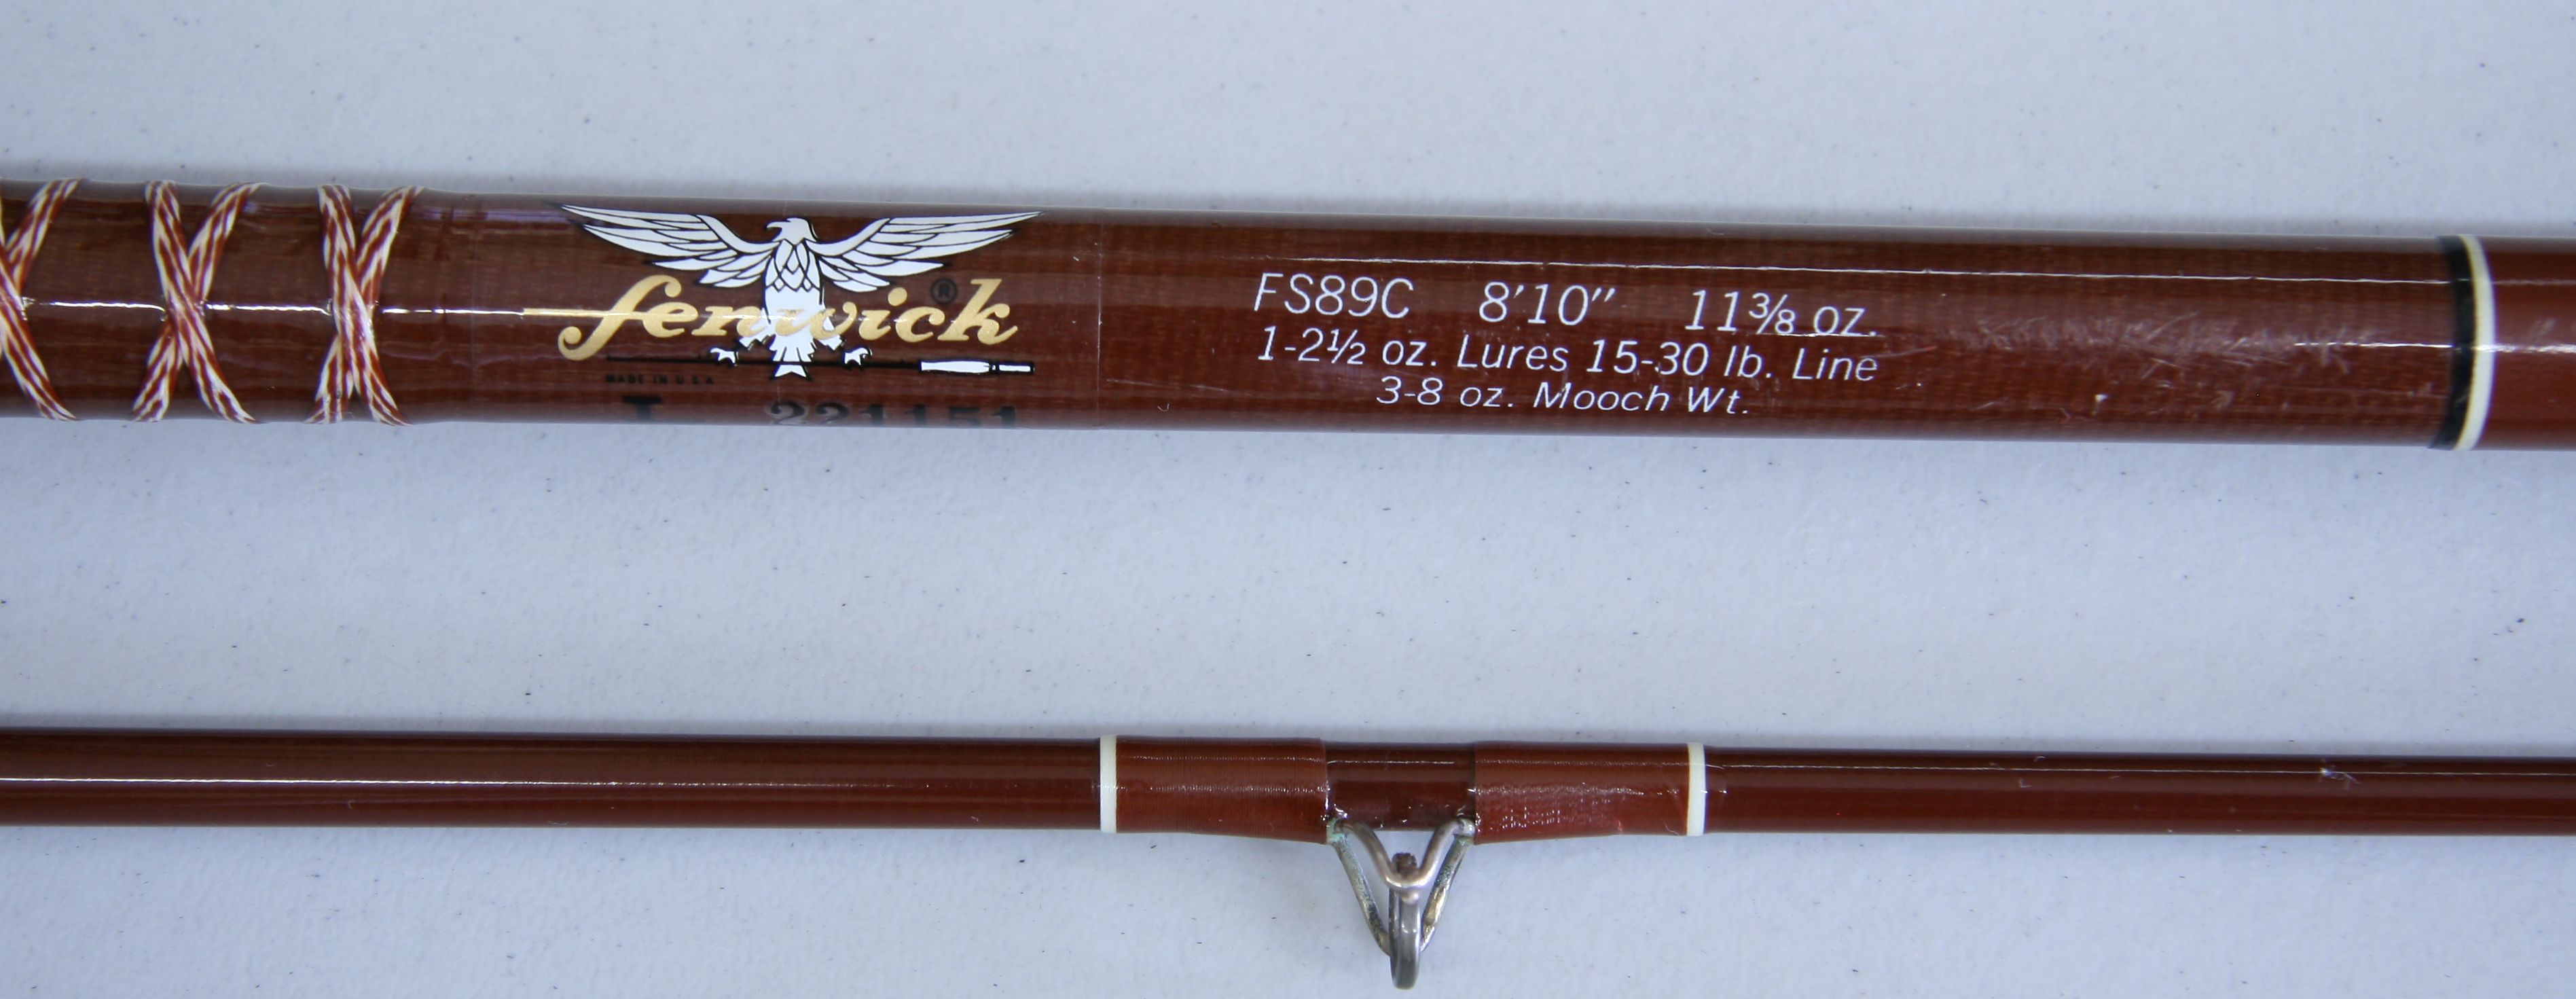 Reels. - Rick's Rods Vintage Fly Fishing Rods, Reels, and Tackle